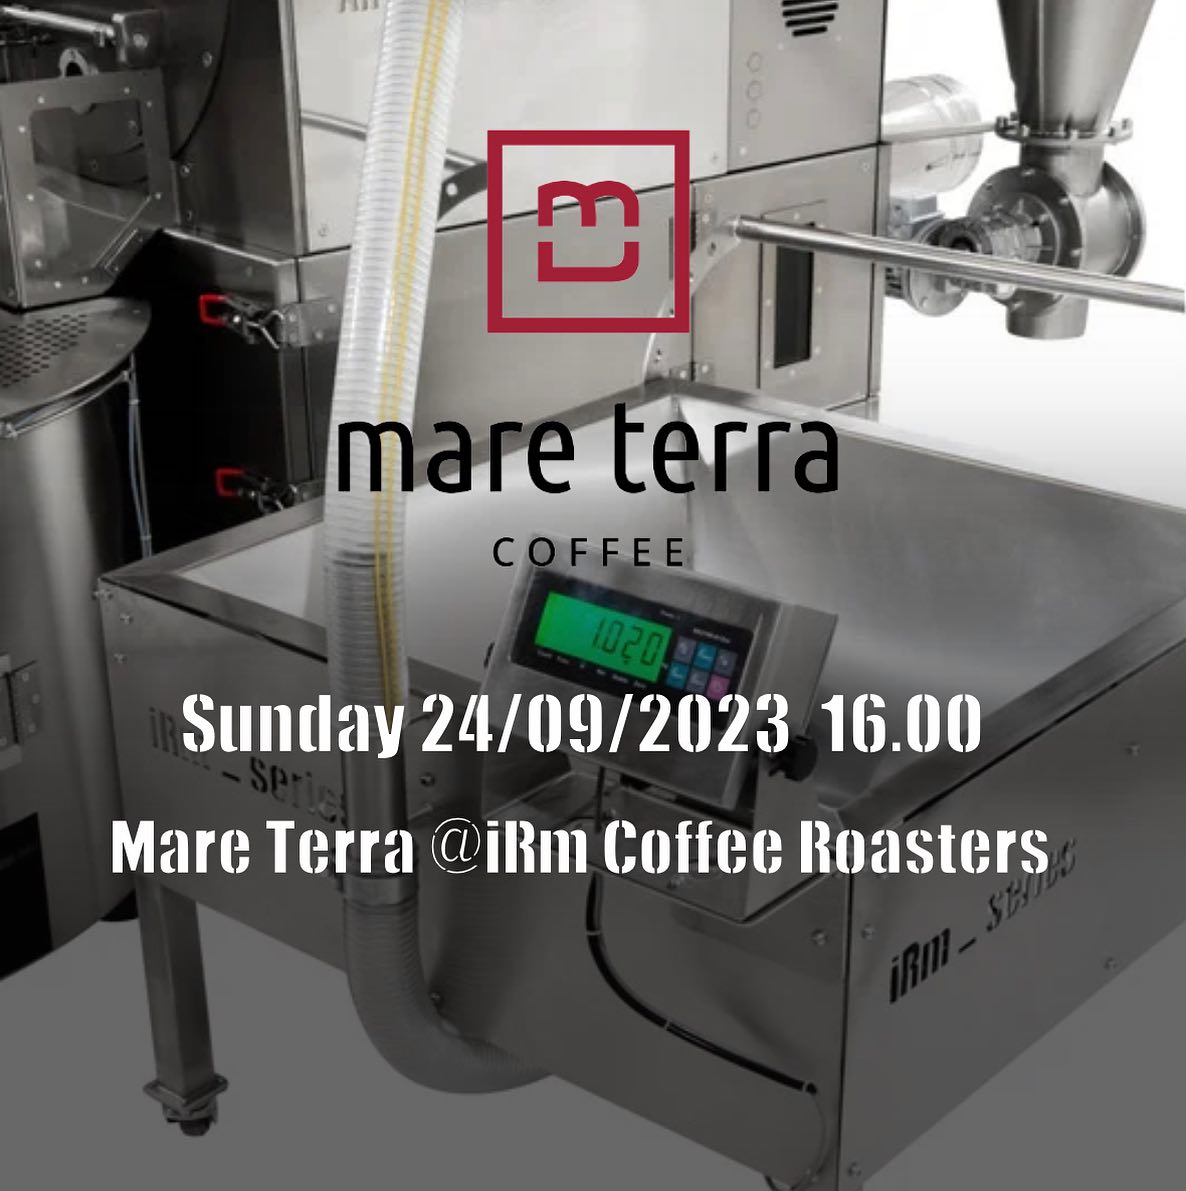 Mare Terra x iRm Coffee Roasters Join us for an inspiring speech. We're thrilled to welcome @mareterracoffee on Sunday at 16:00. Be there!!!